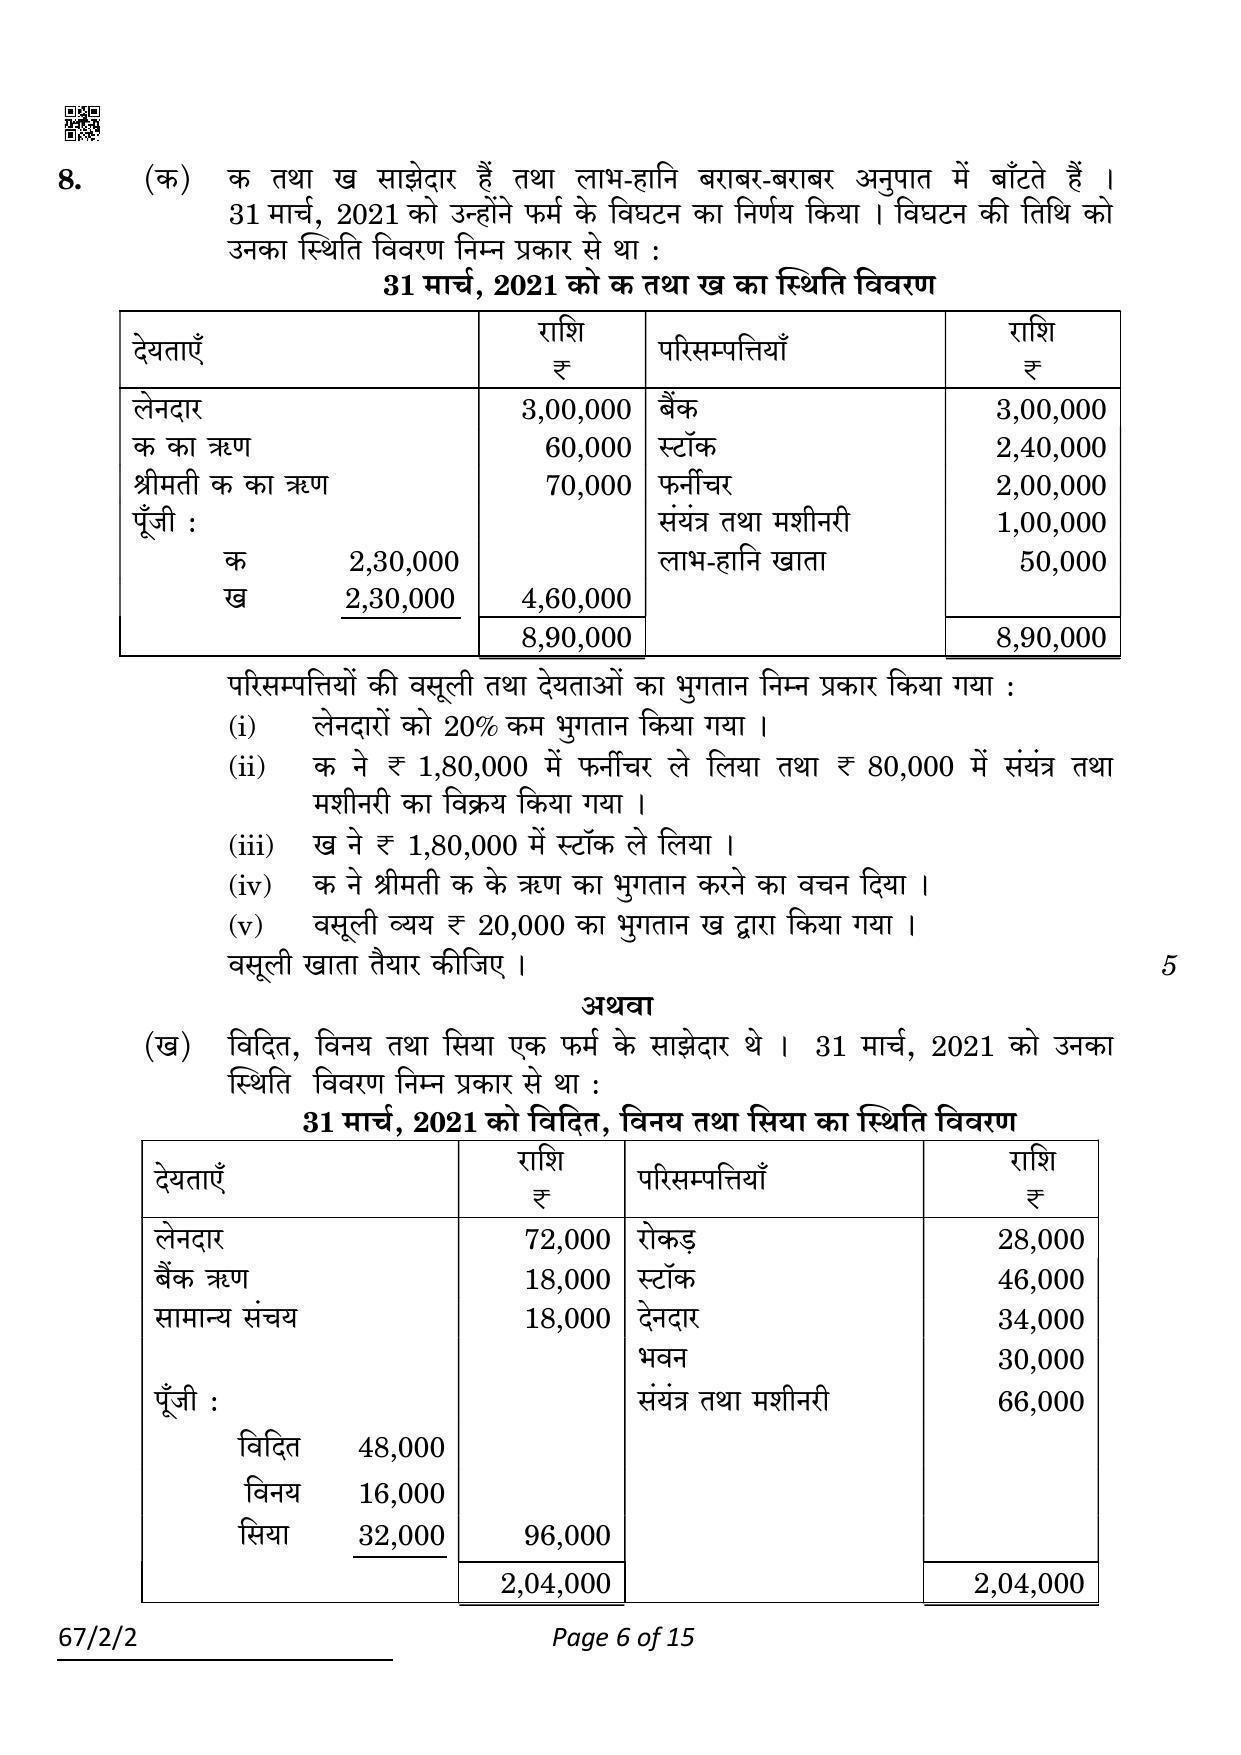 CBSE Class 12 67-2-2 Accountancy 2022 Question Paper - Page 6